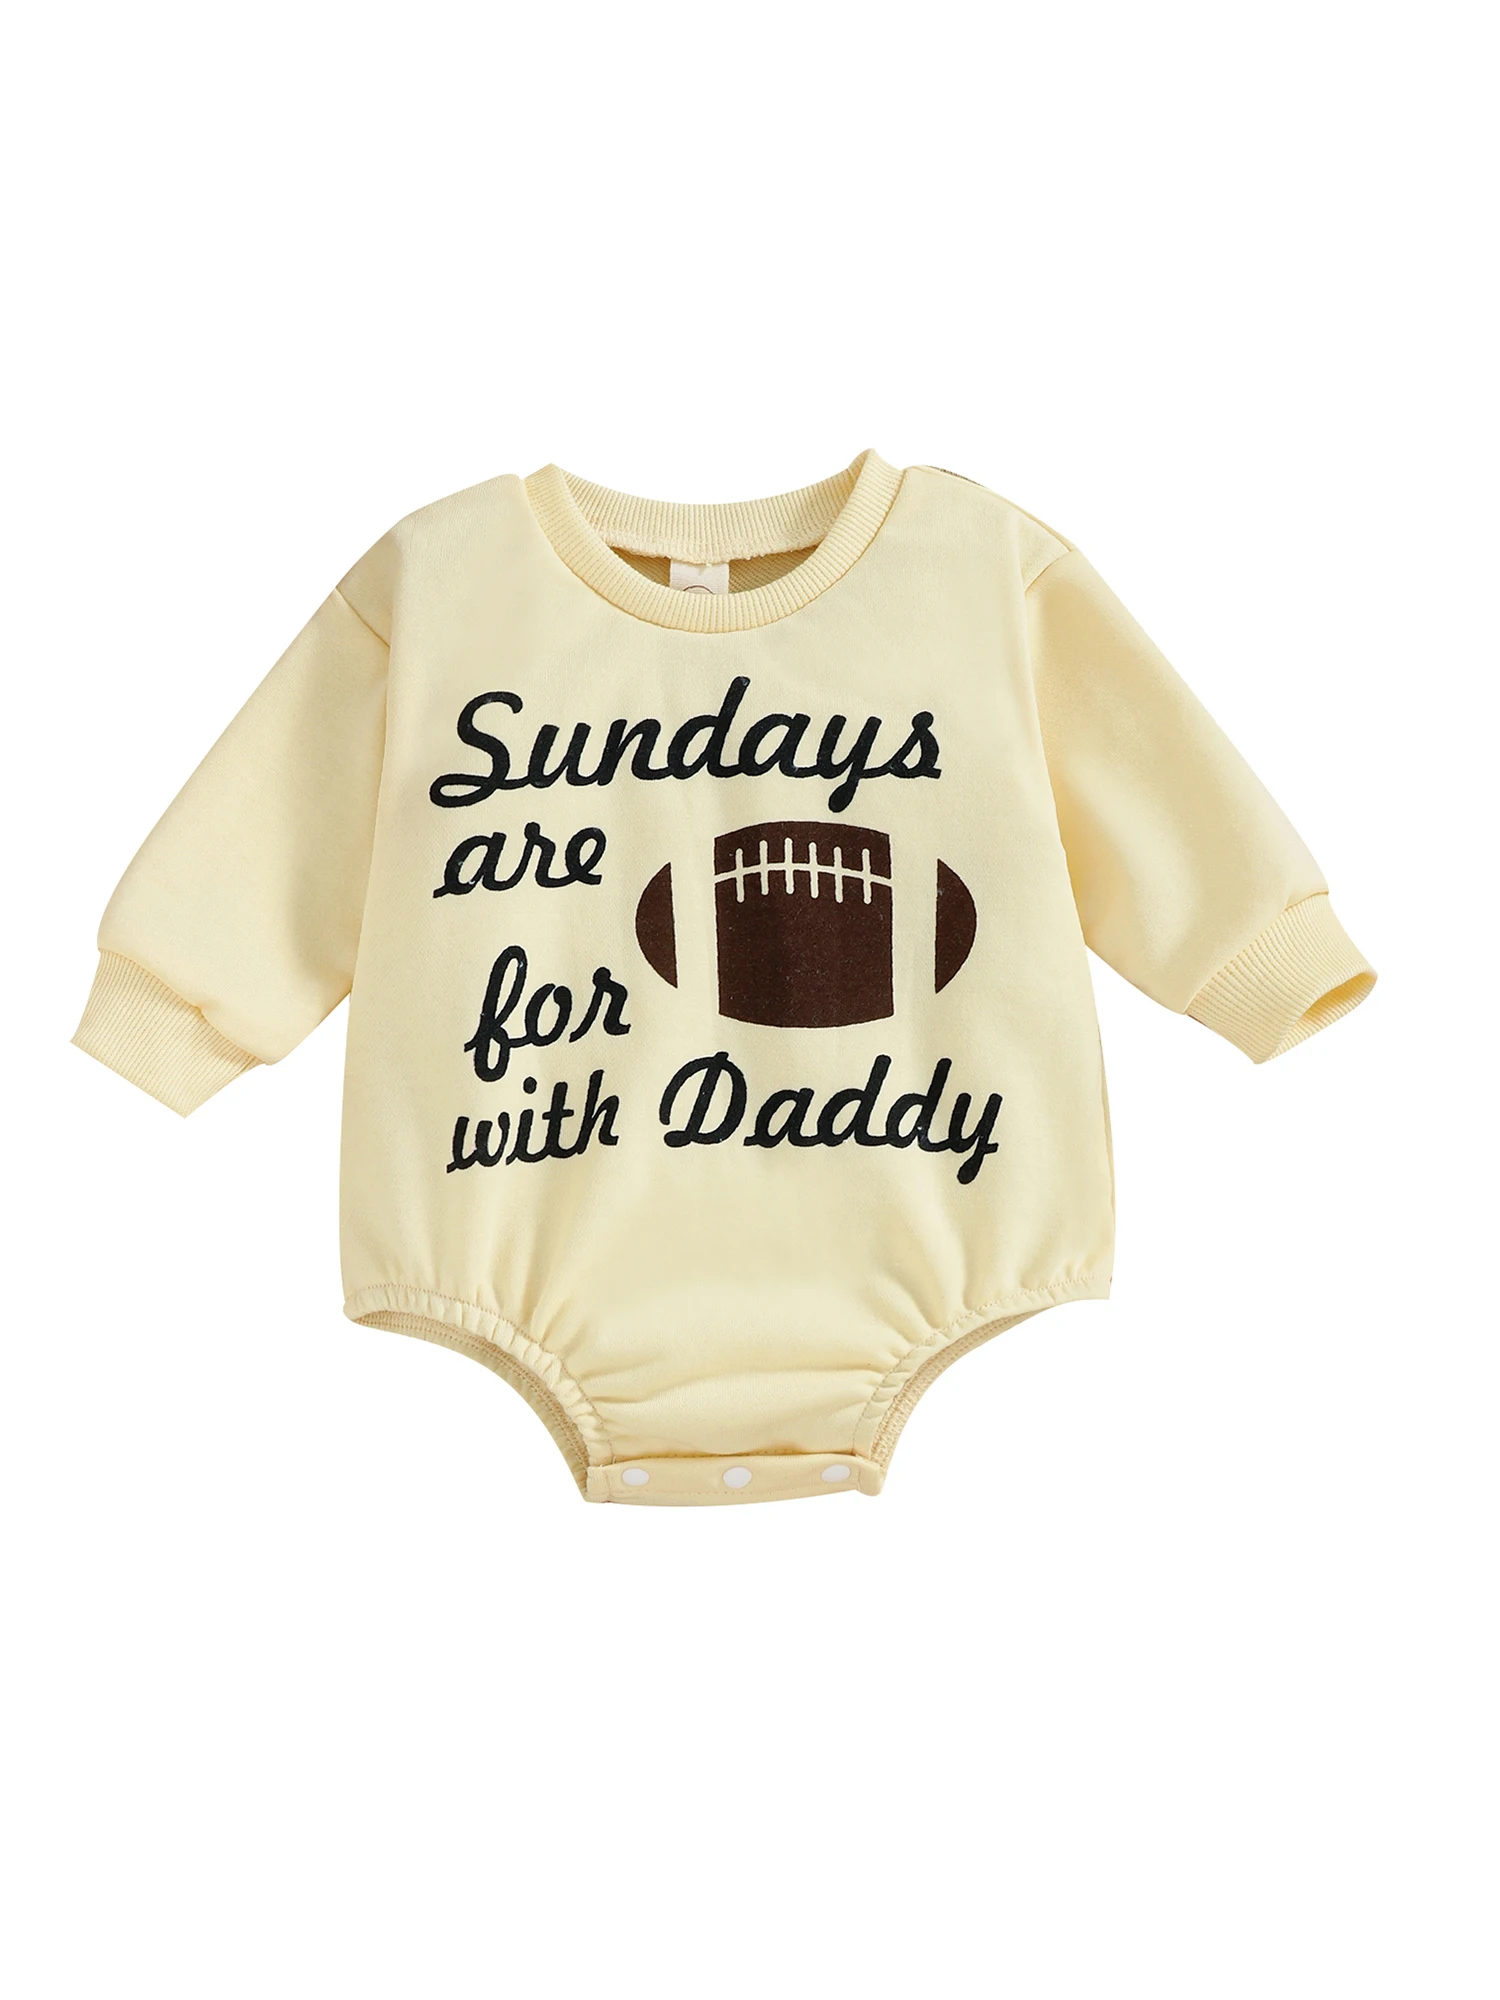 

Newborn Infant Baby Boy Girl Sunday are for Football with Daddy Bodysuit Funny Sweatshirt Romper Bodysuit Fall Clothes